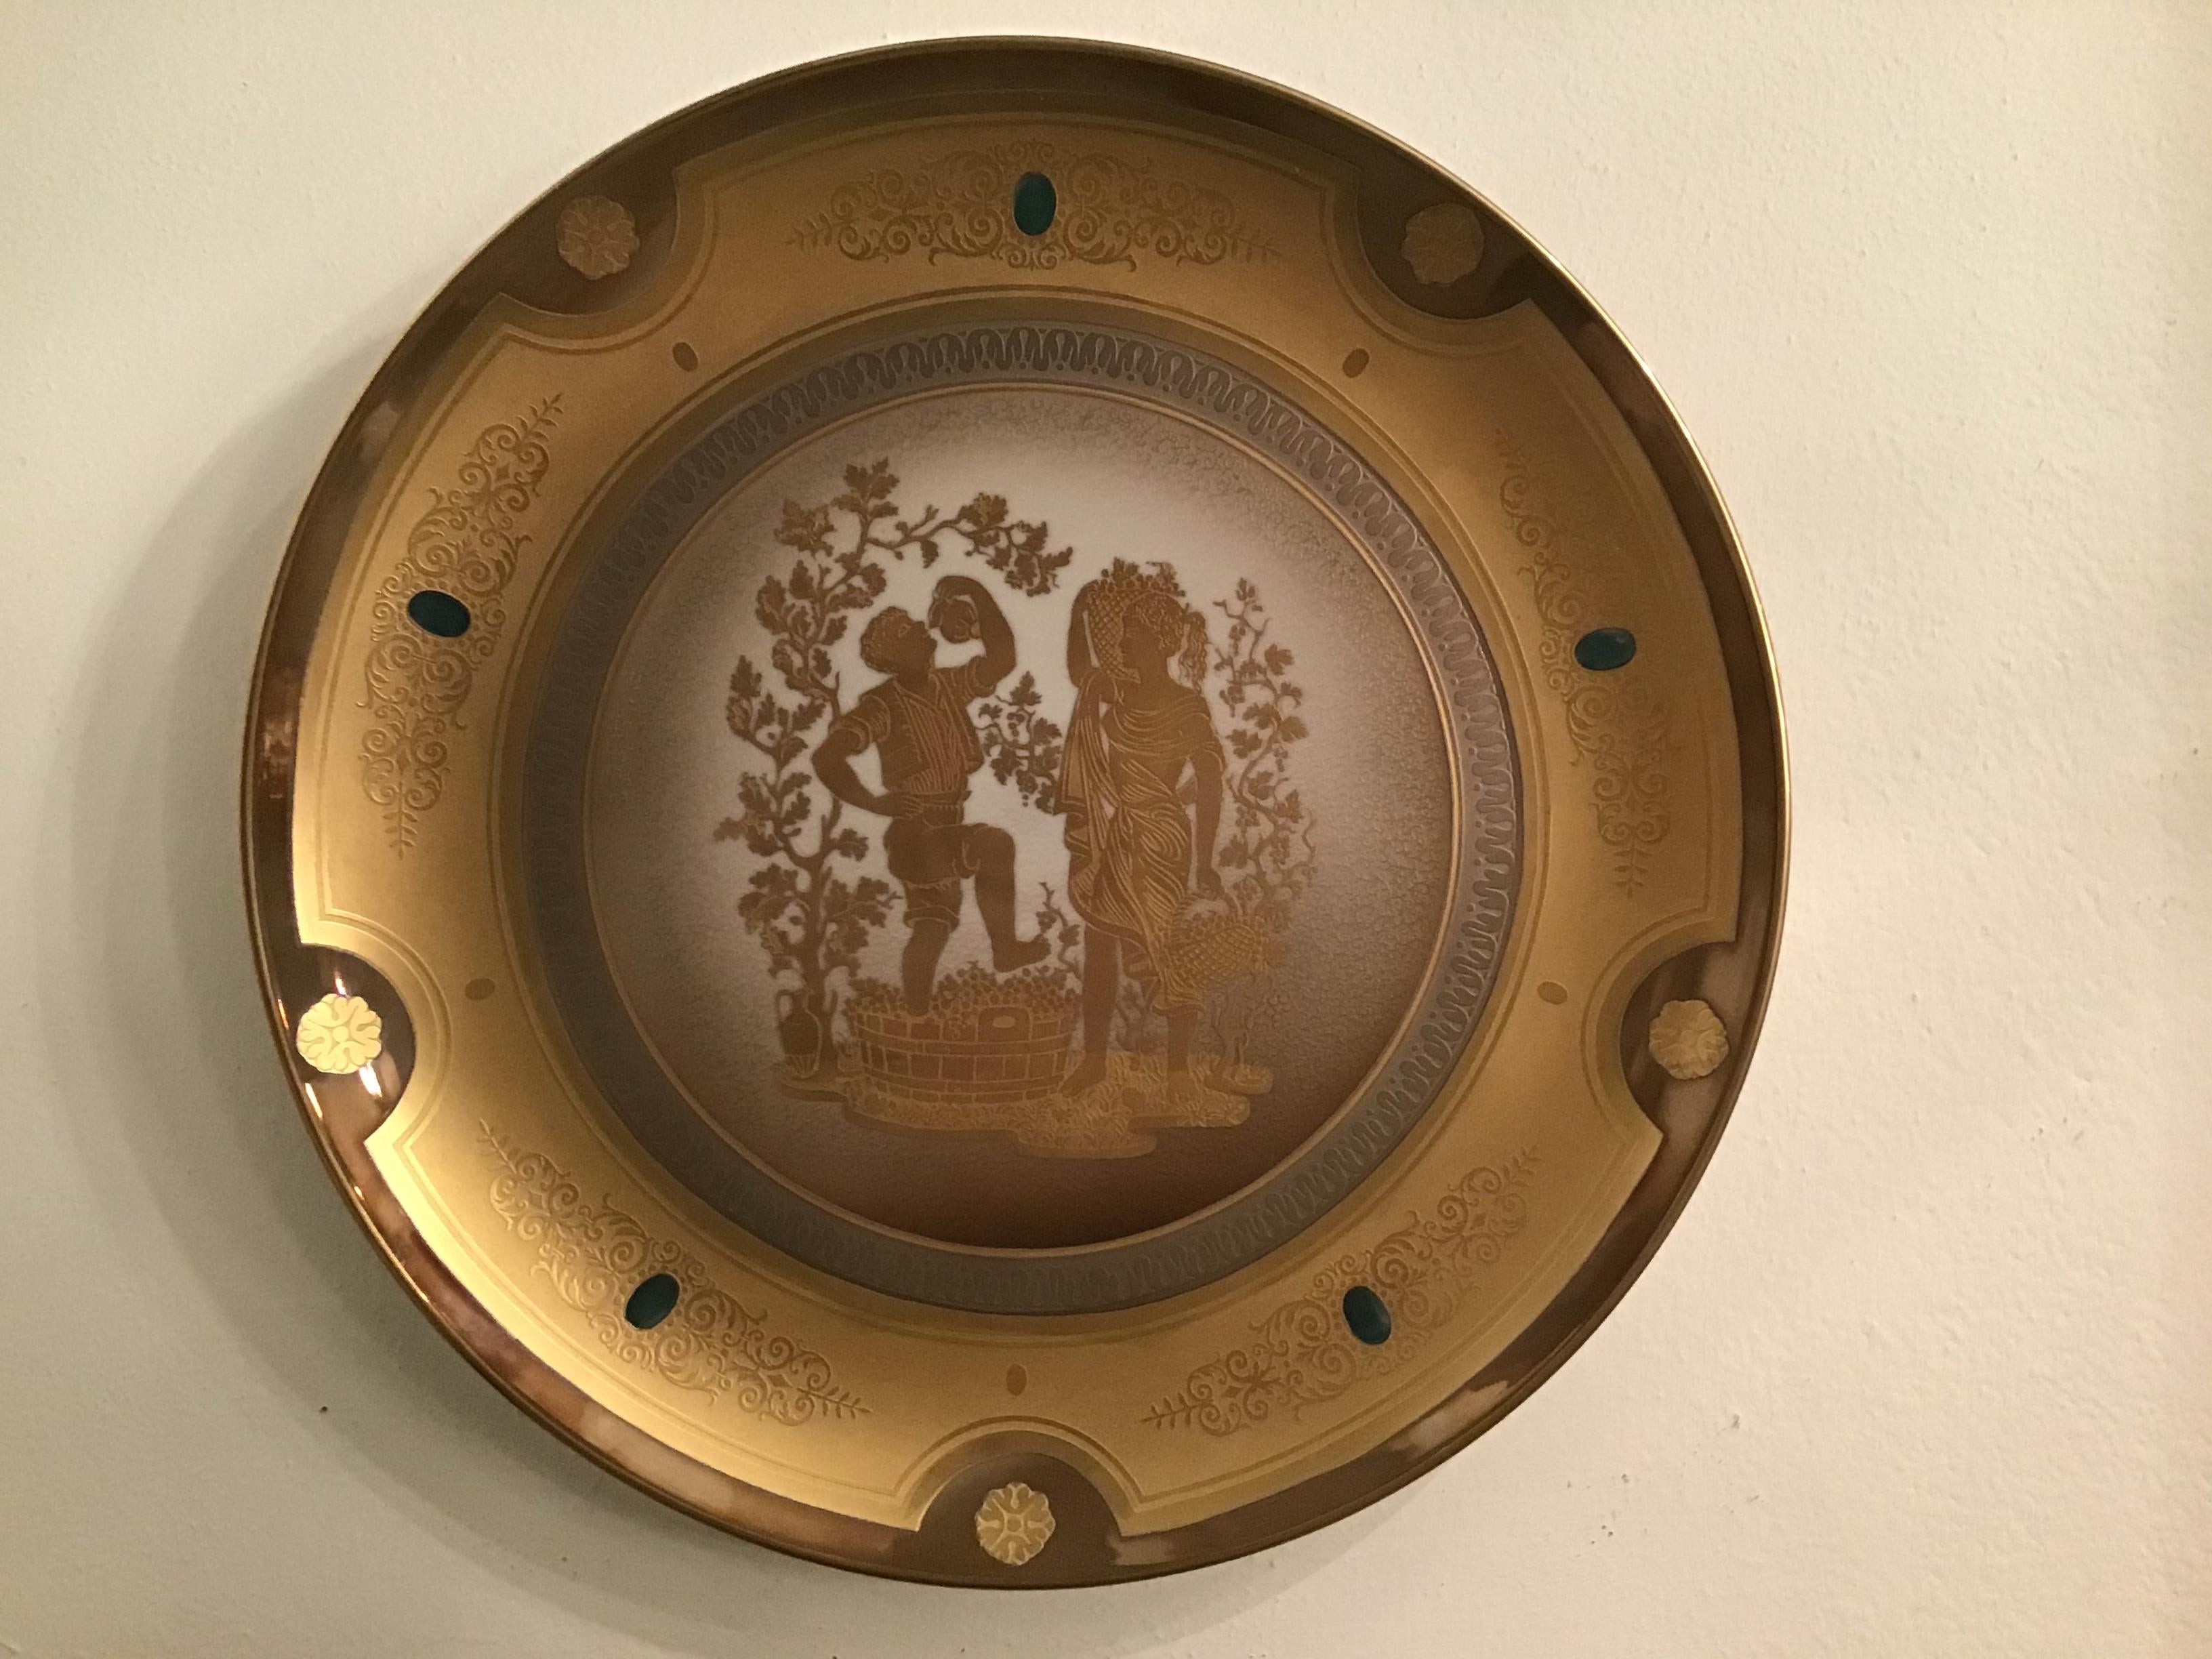 Morbelli Porcelain wall plate gold “ Autunno” 1960 Italy.